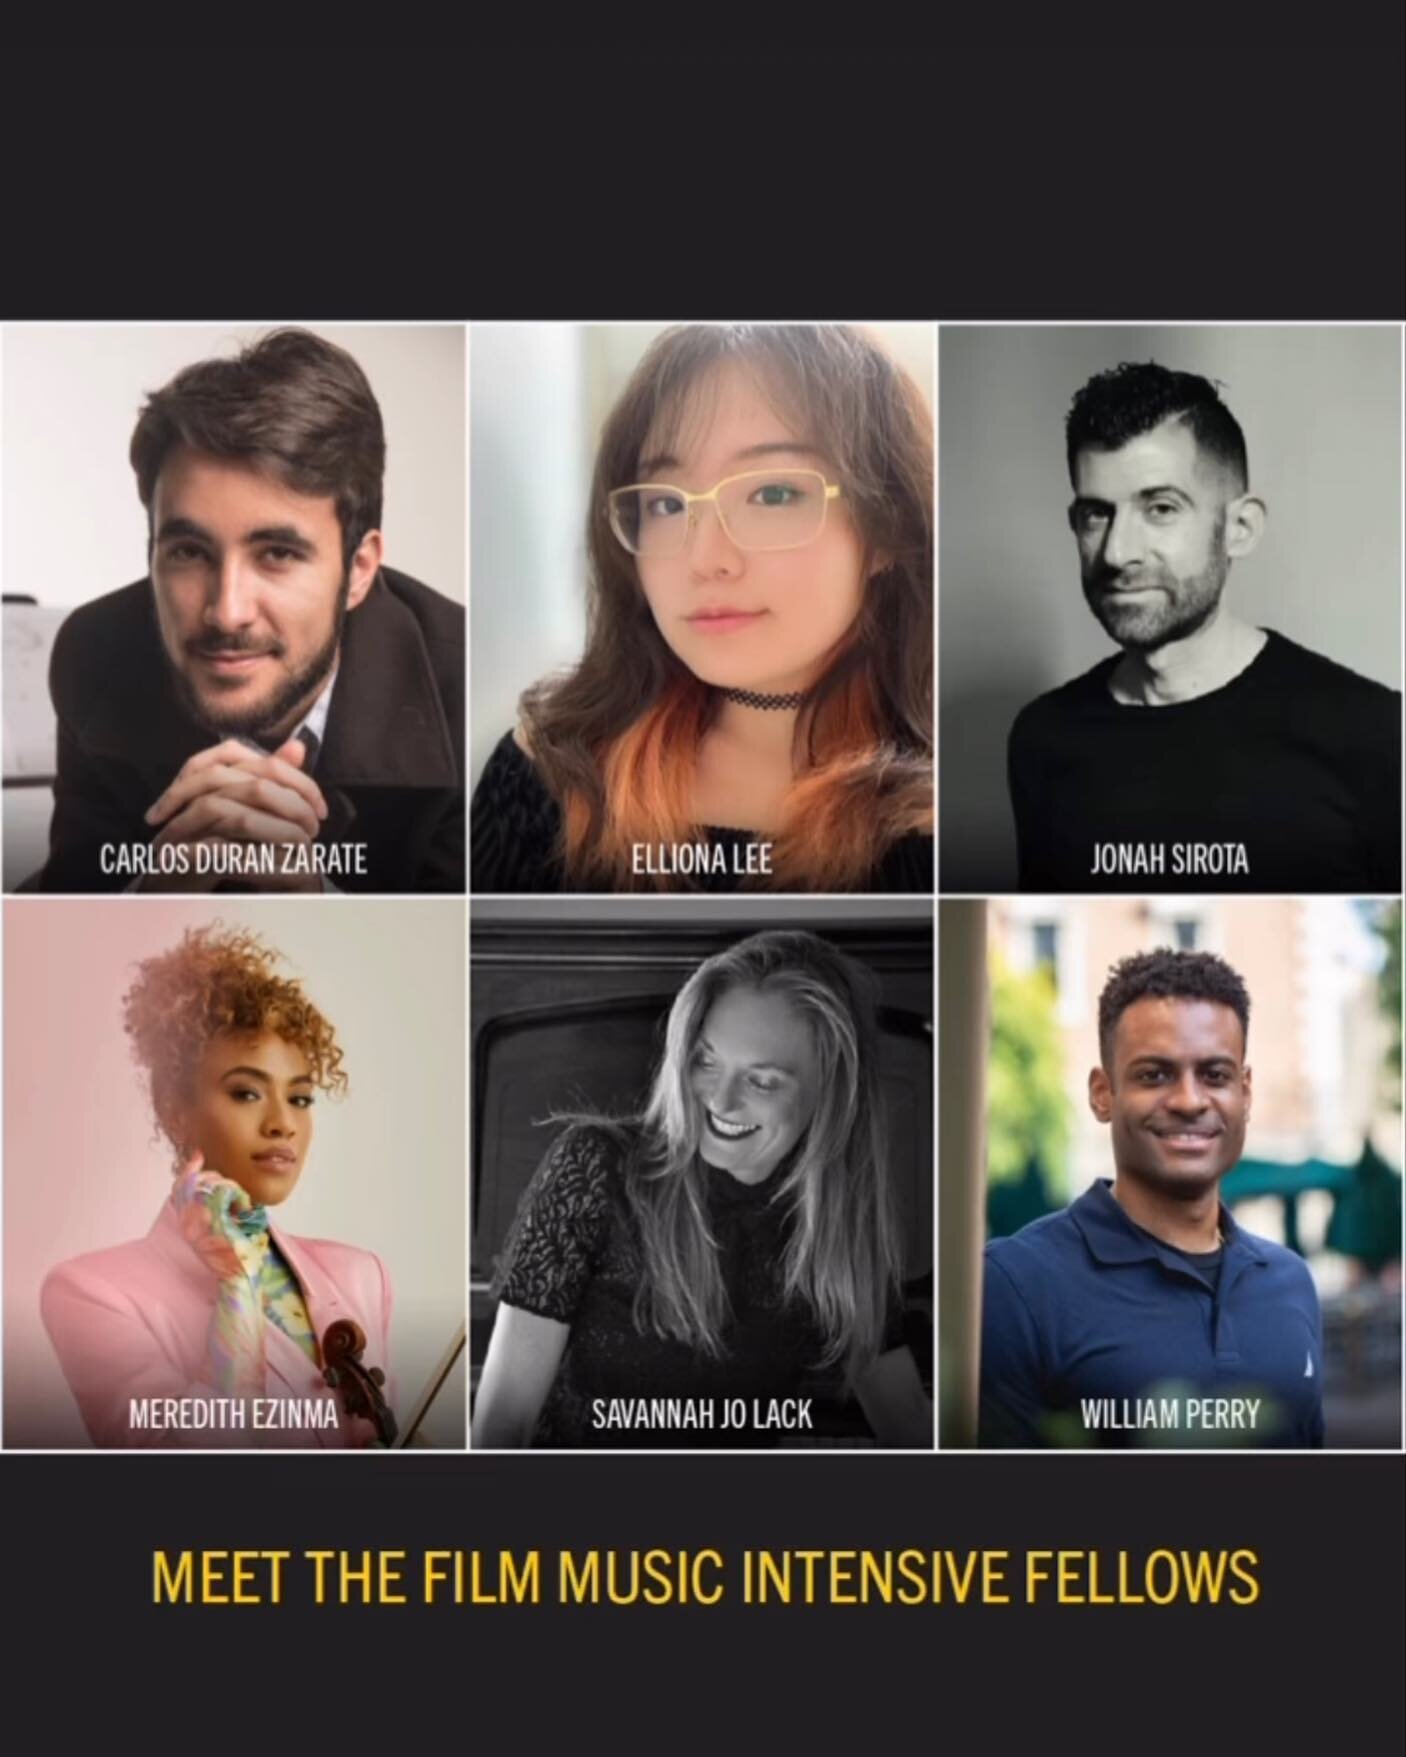 Super honored to be sharing space with these awesome humans this week. #sundanceorg